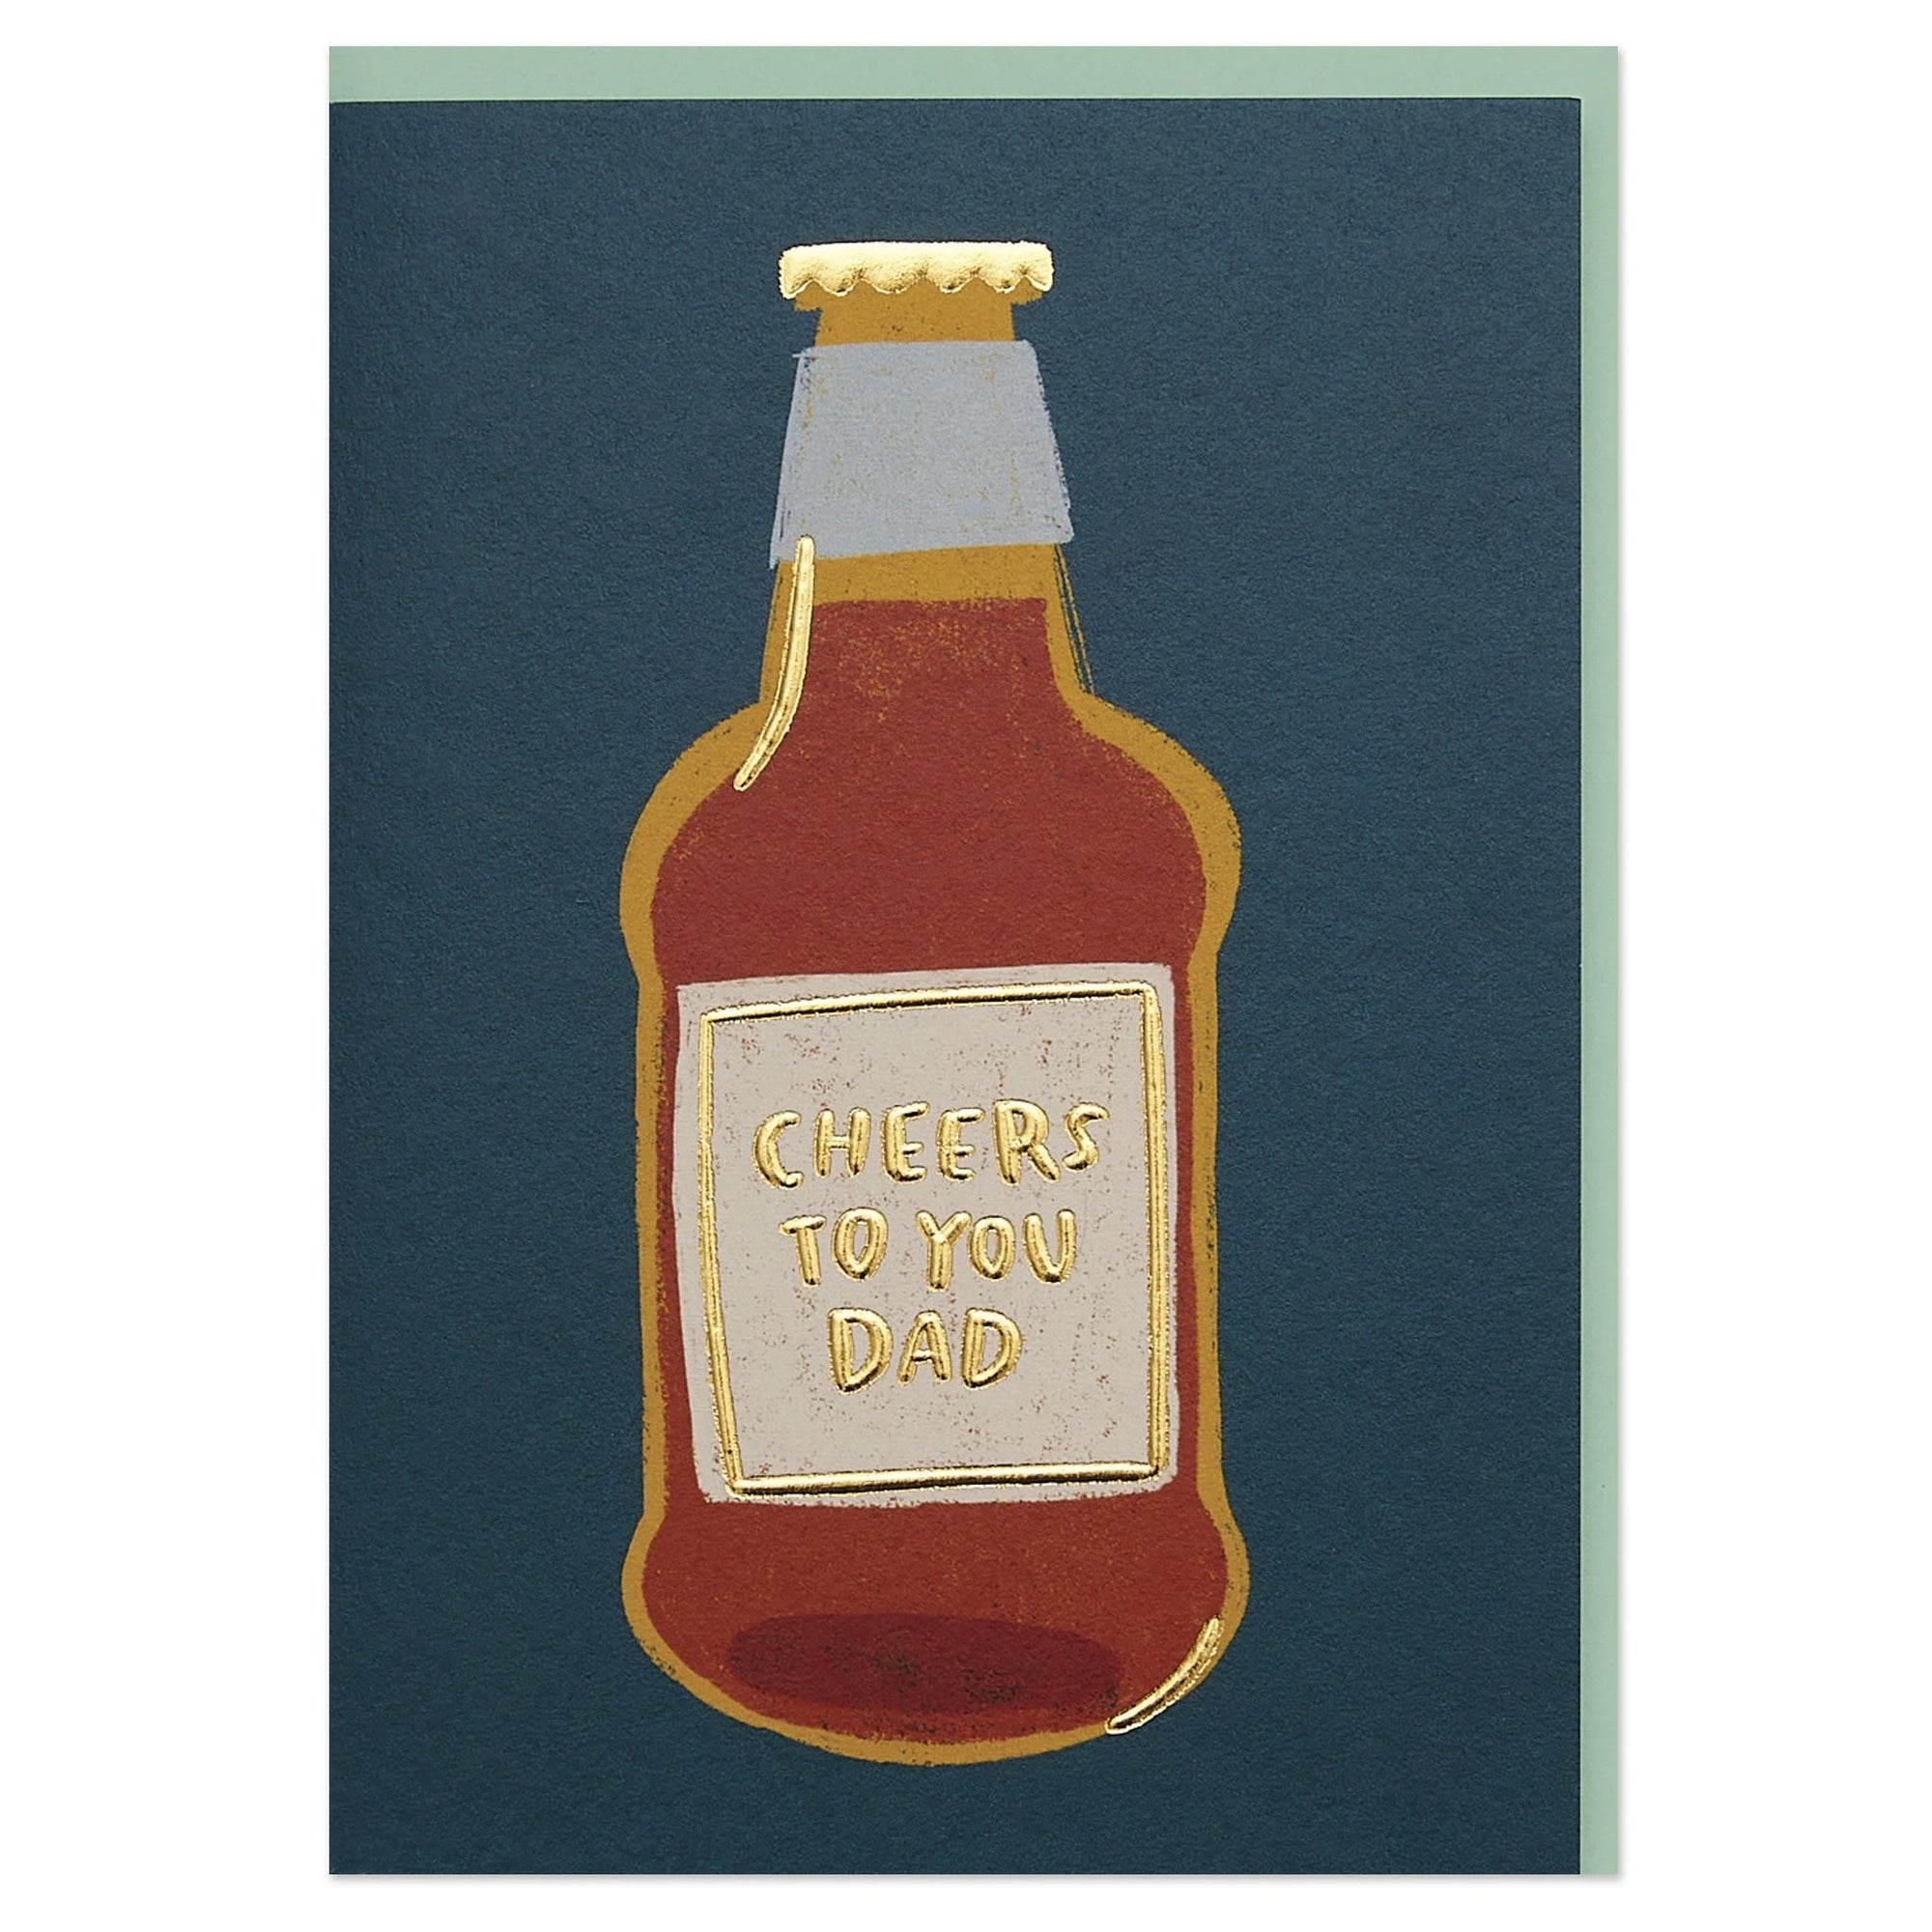 “Cheers to you Dad” beer card